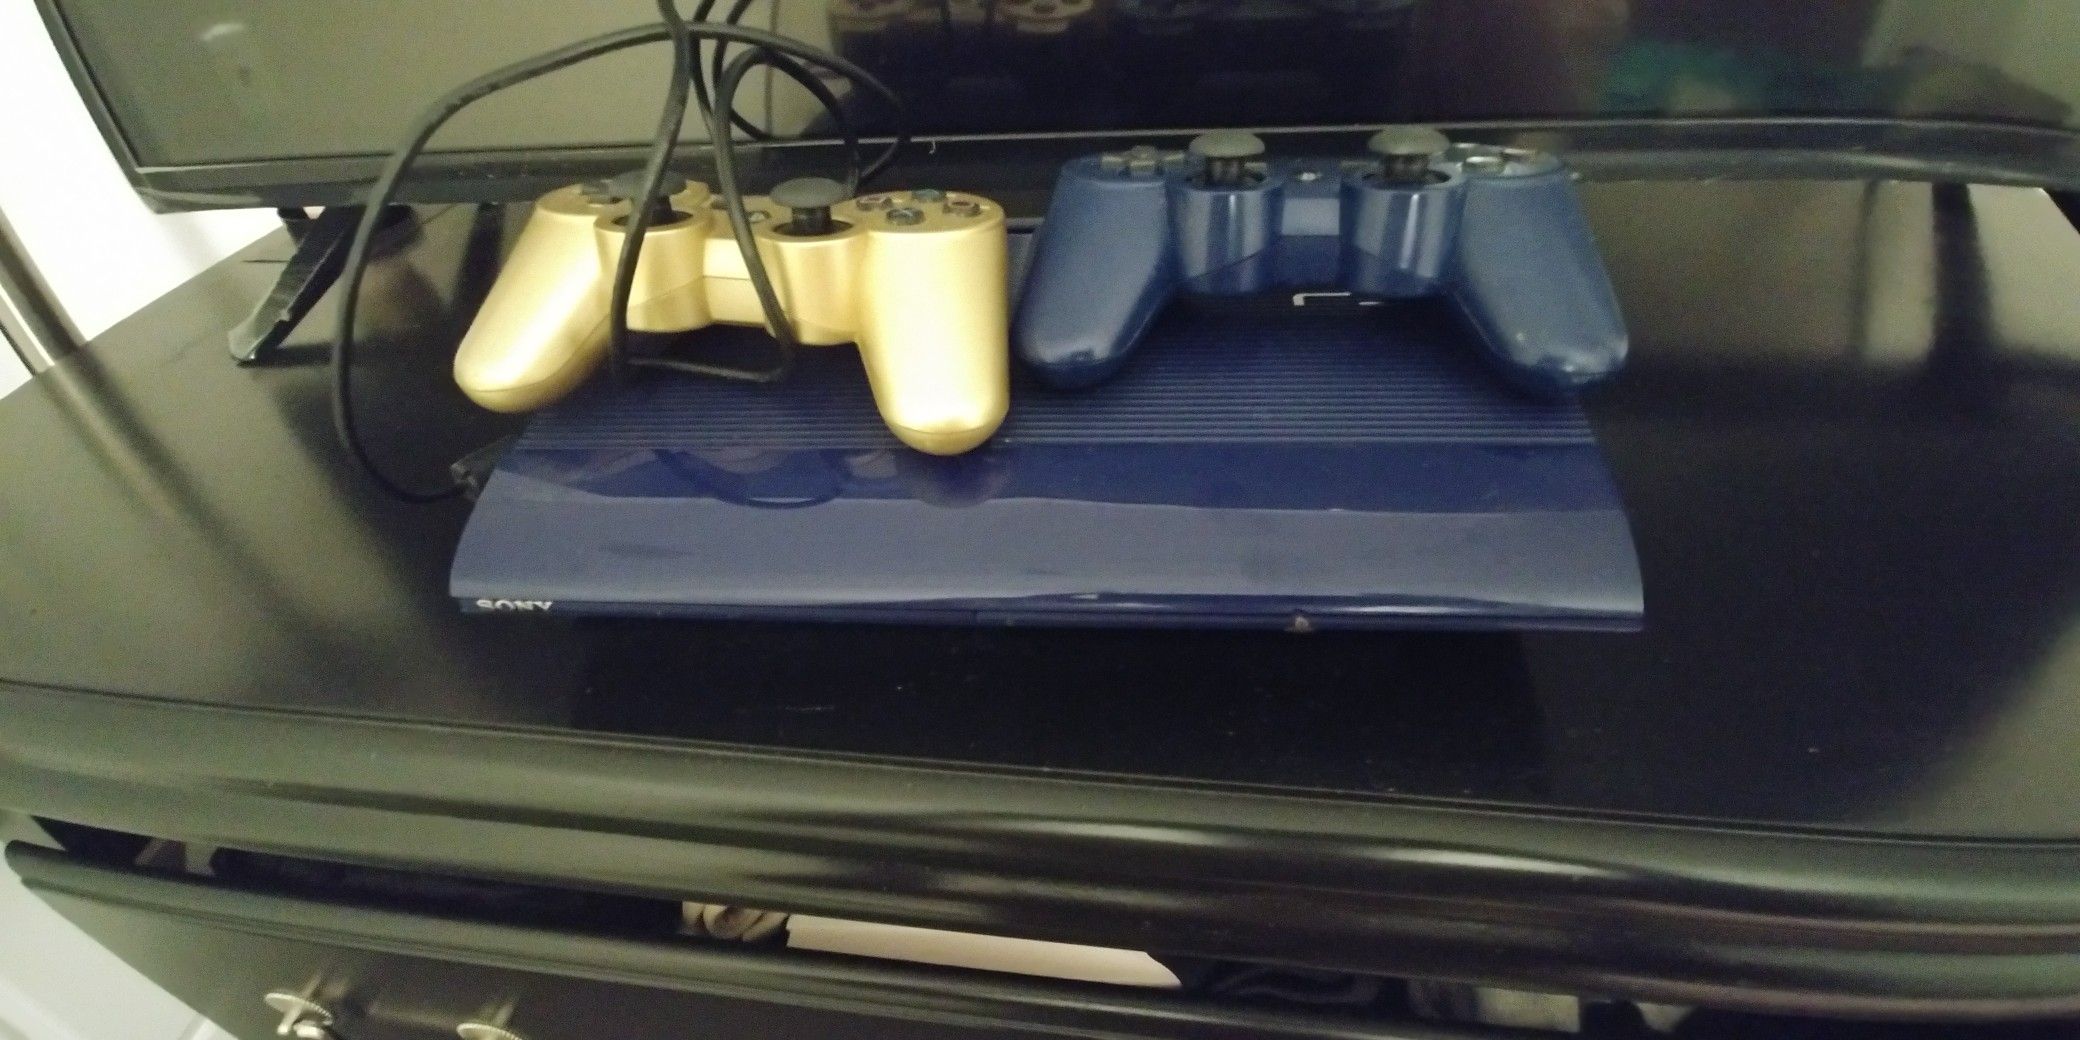 Ps3 , controllers and games